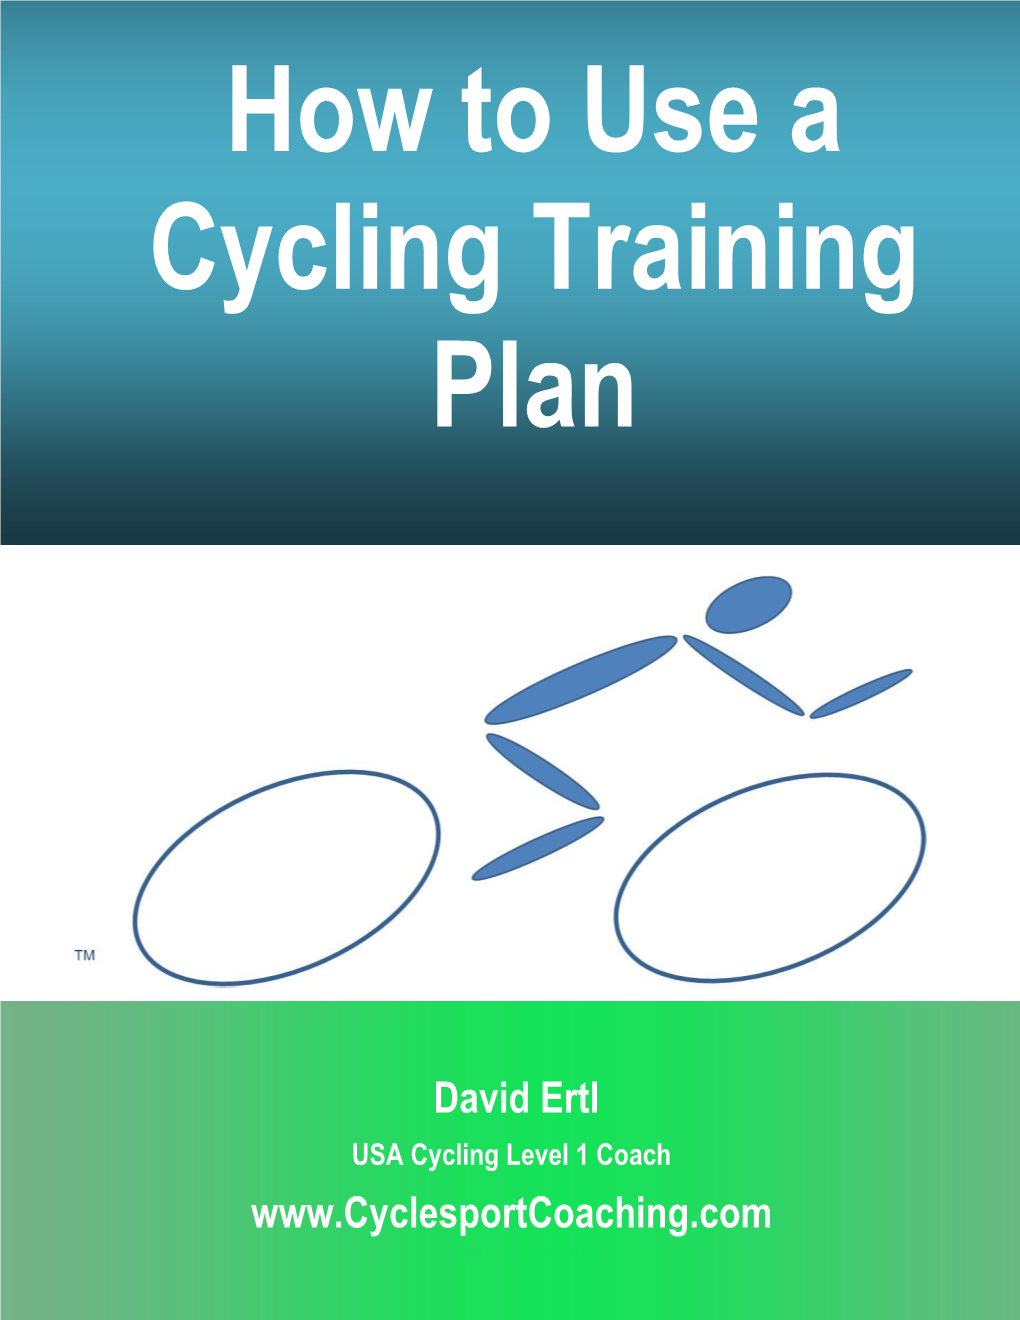 Basics of Cycling Physiology and Training